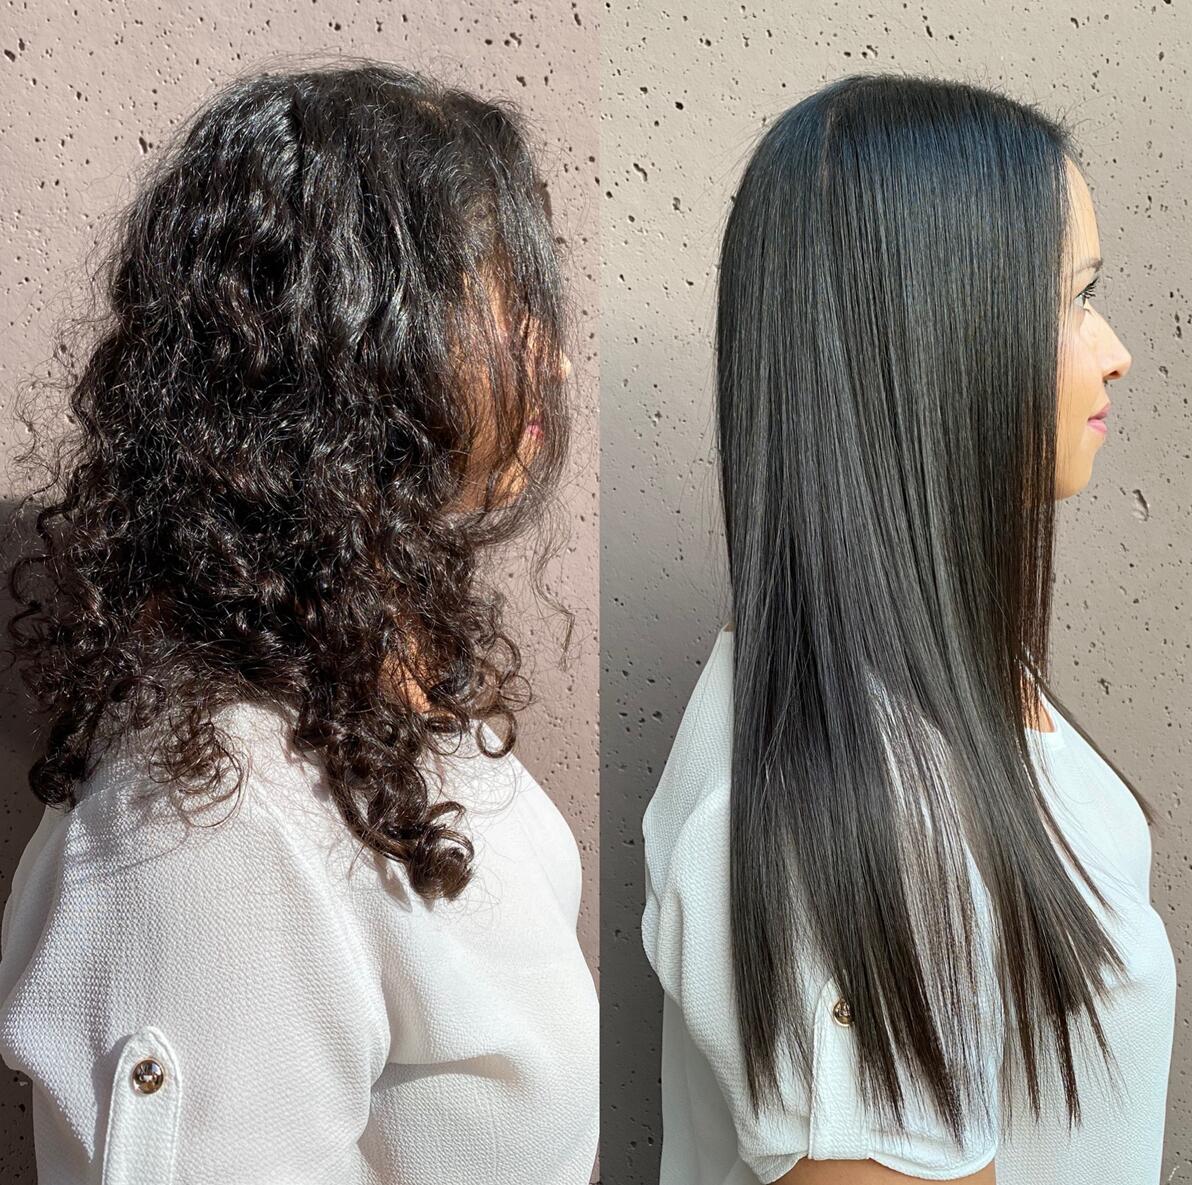 Uberliss treated hair before and after 1